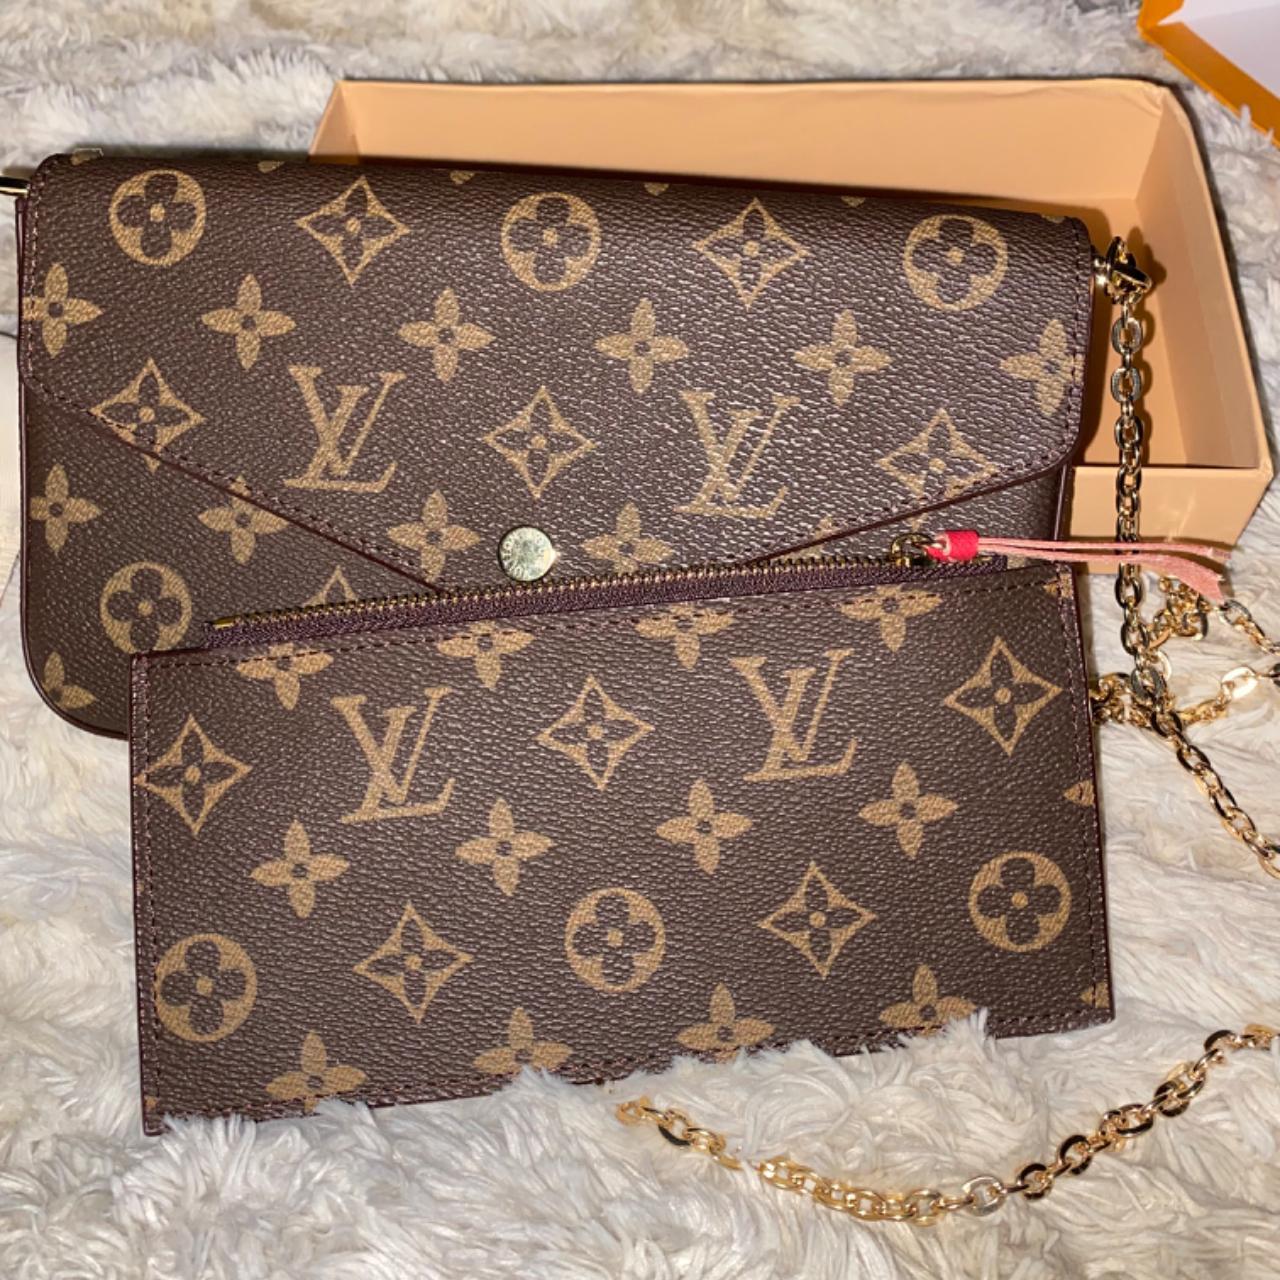 Louis Vuitton neverfull MM epi leather discontinued - Depop